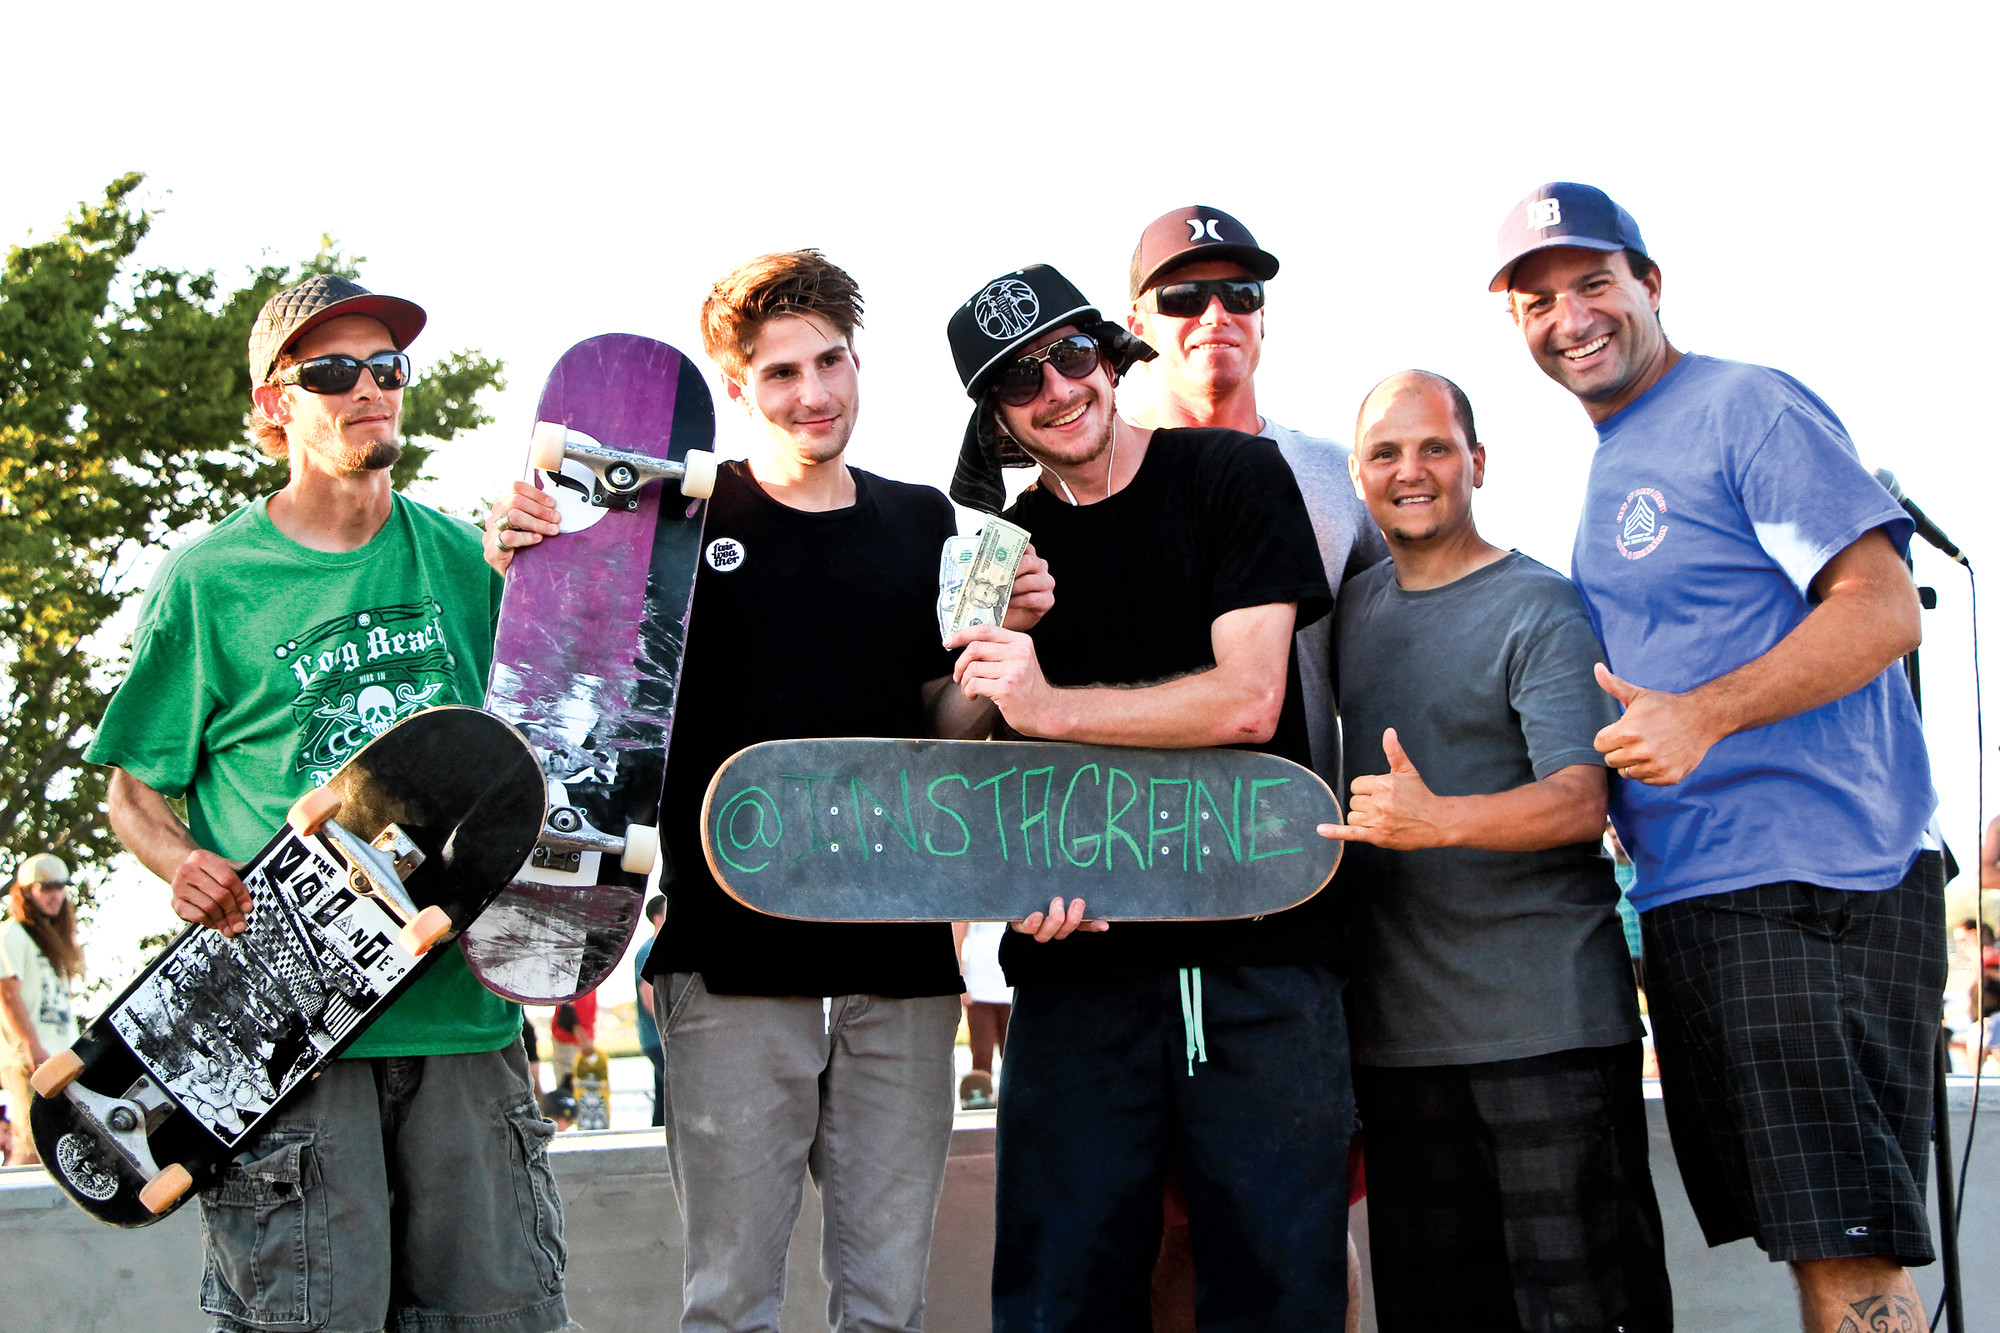 Photos by Maureen Lennon/Herald
Skateboarders Iggy Mulqueen, far left, Jesse McEneaney and Shane McGrane with Cliff Skudin, Joe Rockman and City Councilman Anthony Eramo.